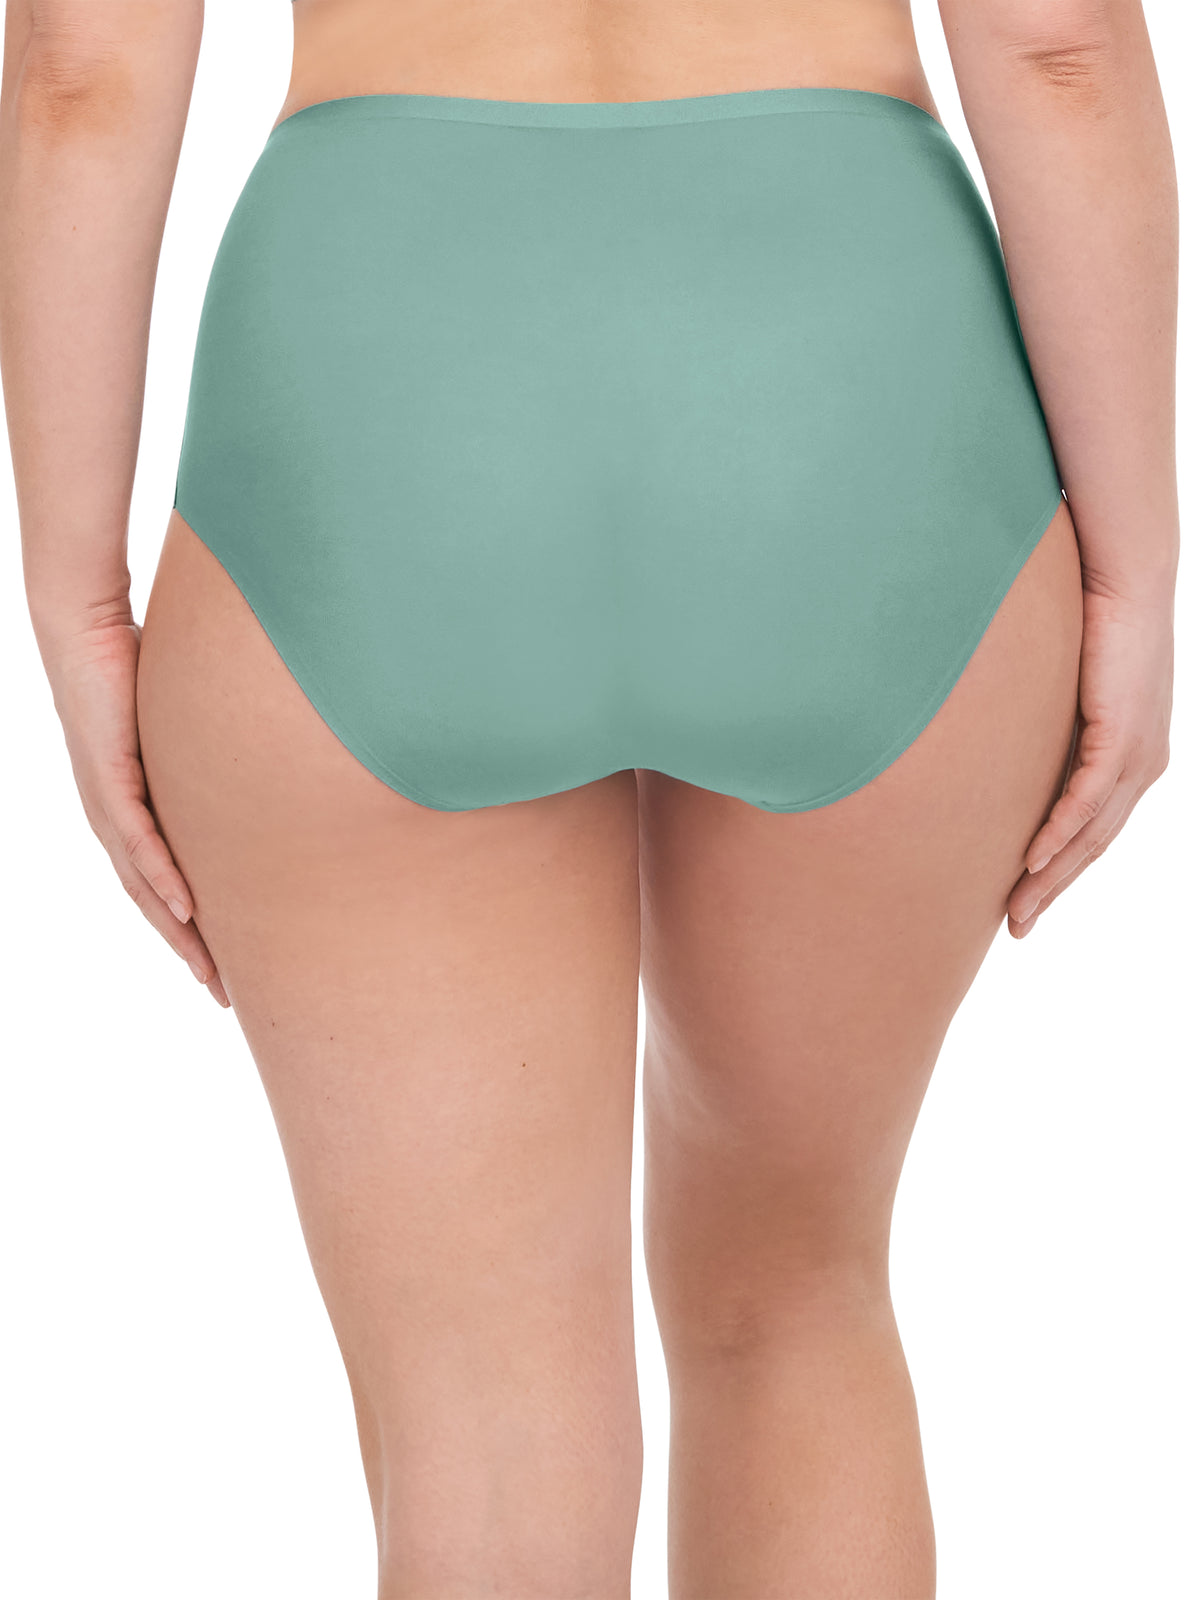 Chantelle Soft Stretch Seamless Full Briefs One Size 2647